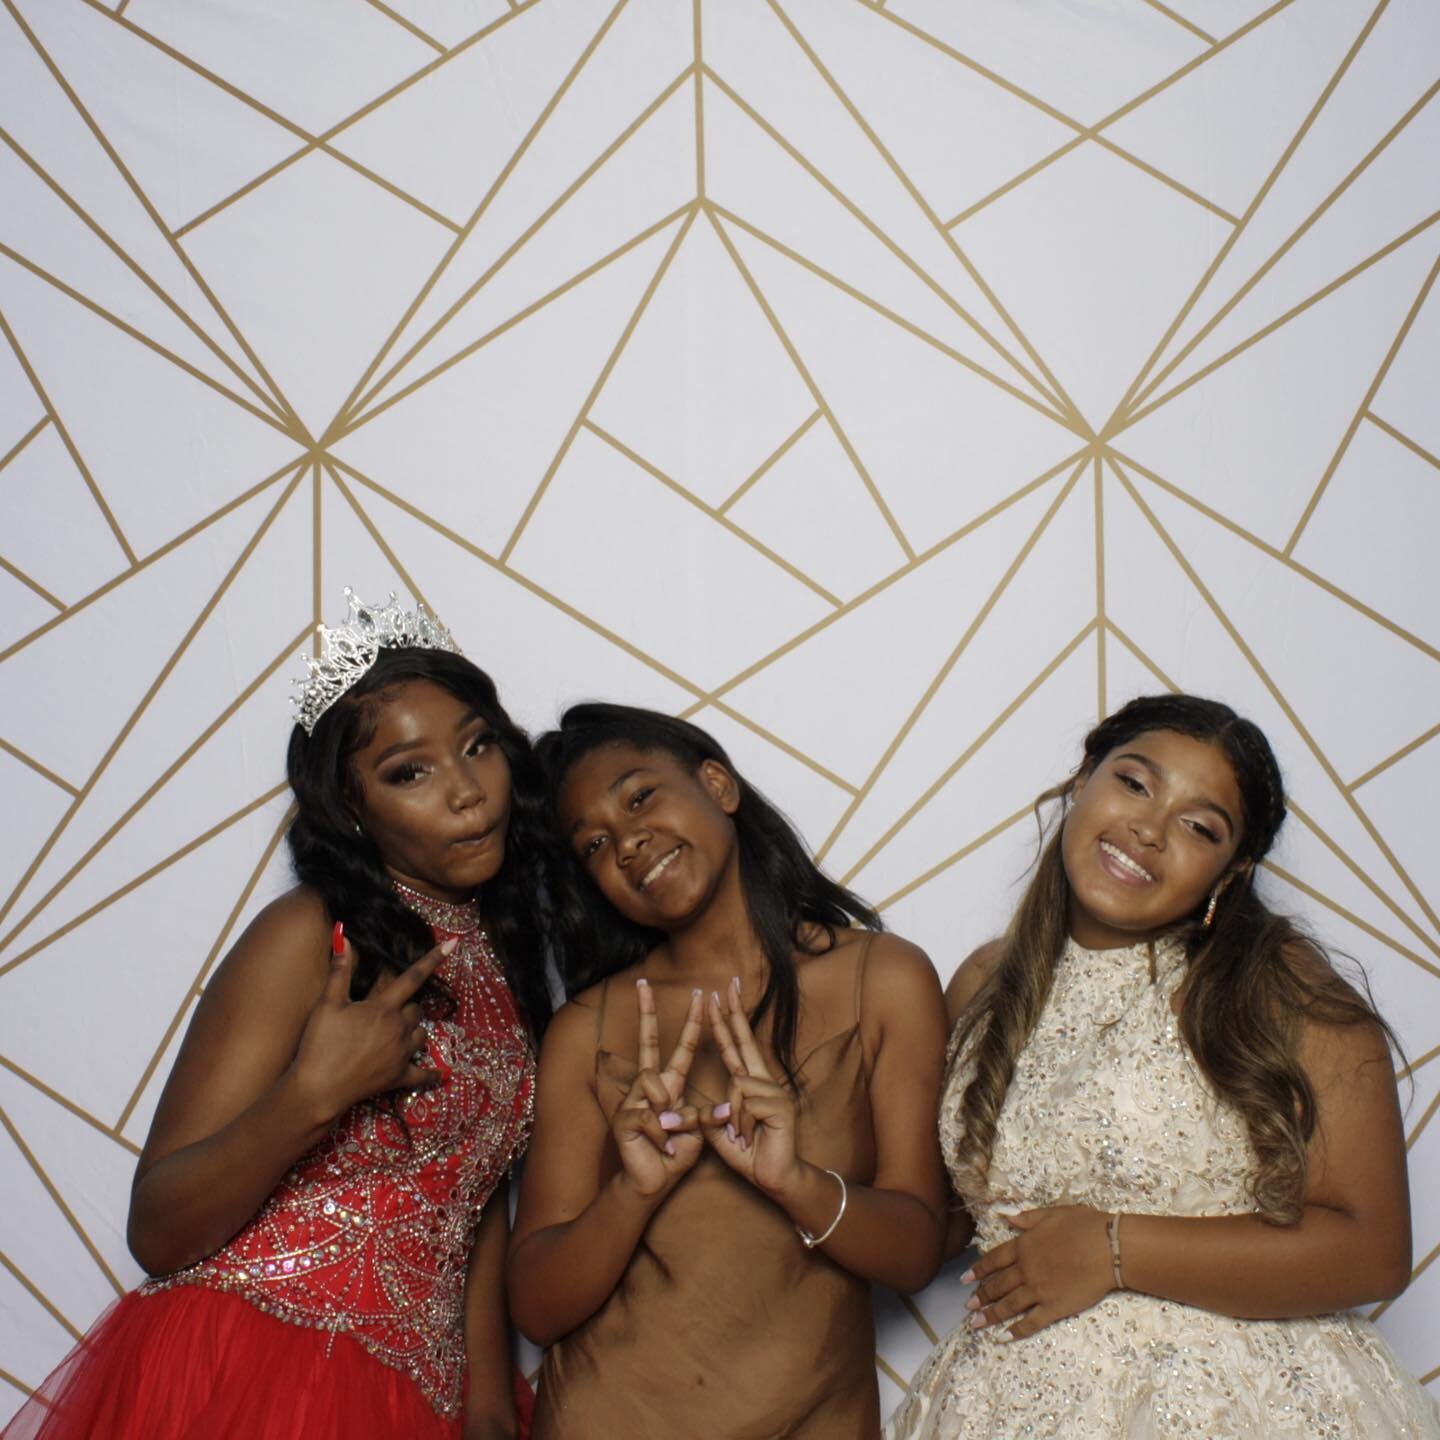 Happy Sweet Sixteen birthday to these two beautiful young queens! We had so much fun at your party!  Book your next birthday party or special event with us!  #bayareaphotobooth #photoboothfun #photobooth #bayareaevent planners